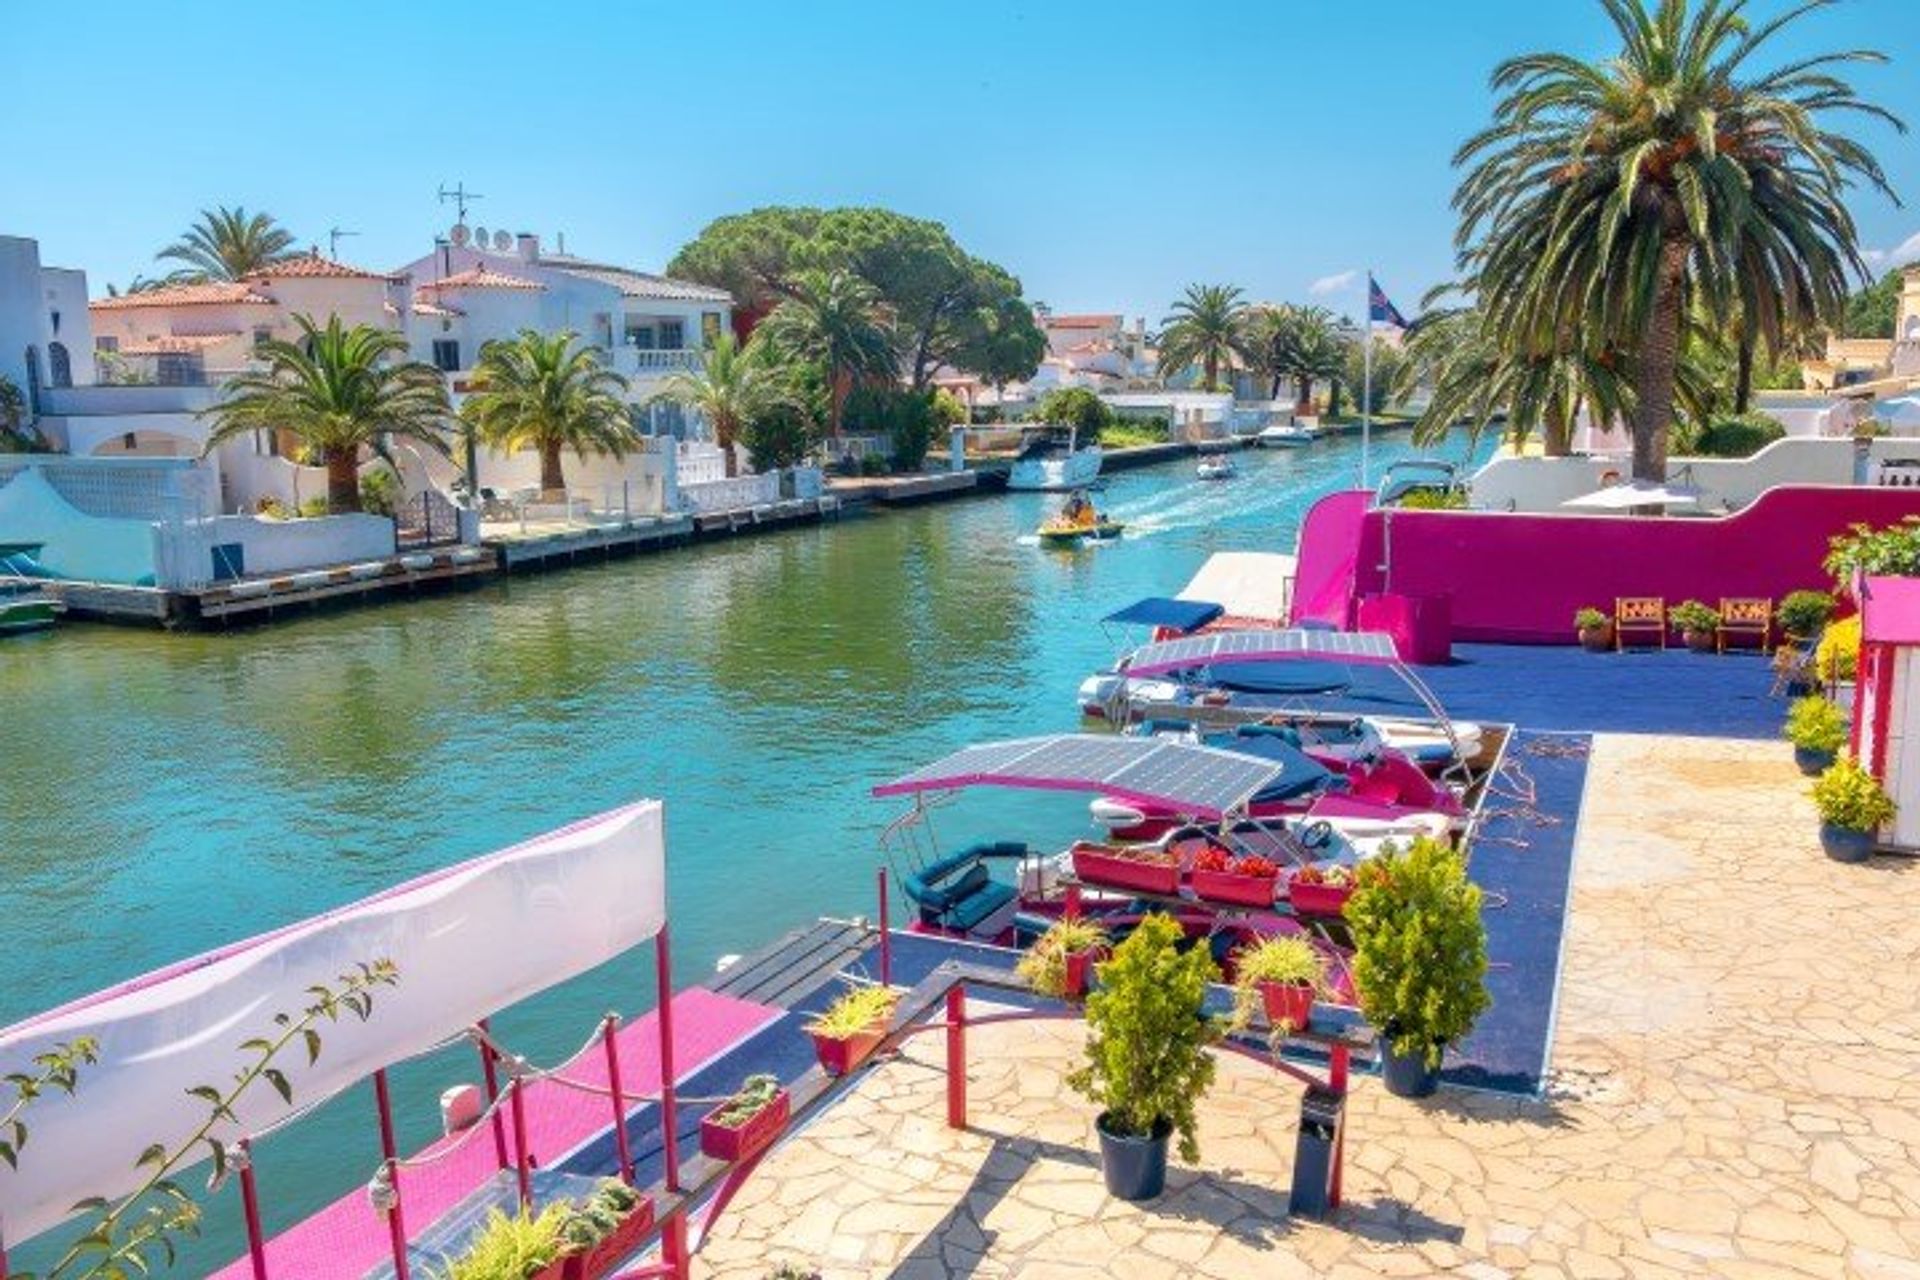 Take a canal boat tour along the colourful waterfront with its luxury villas